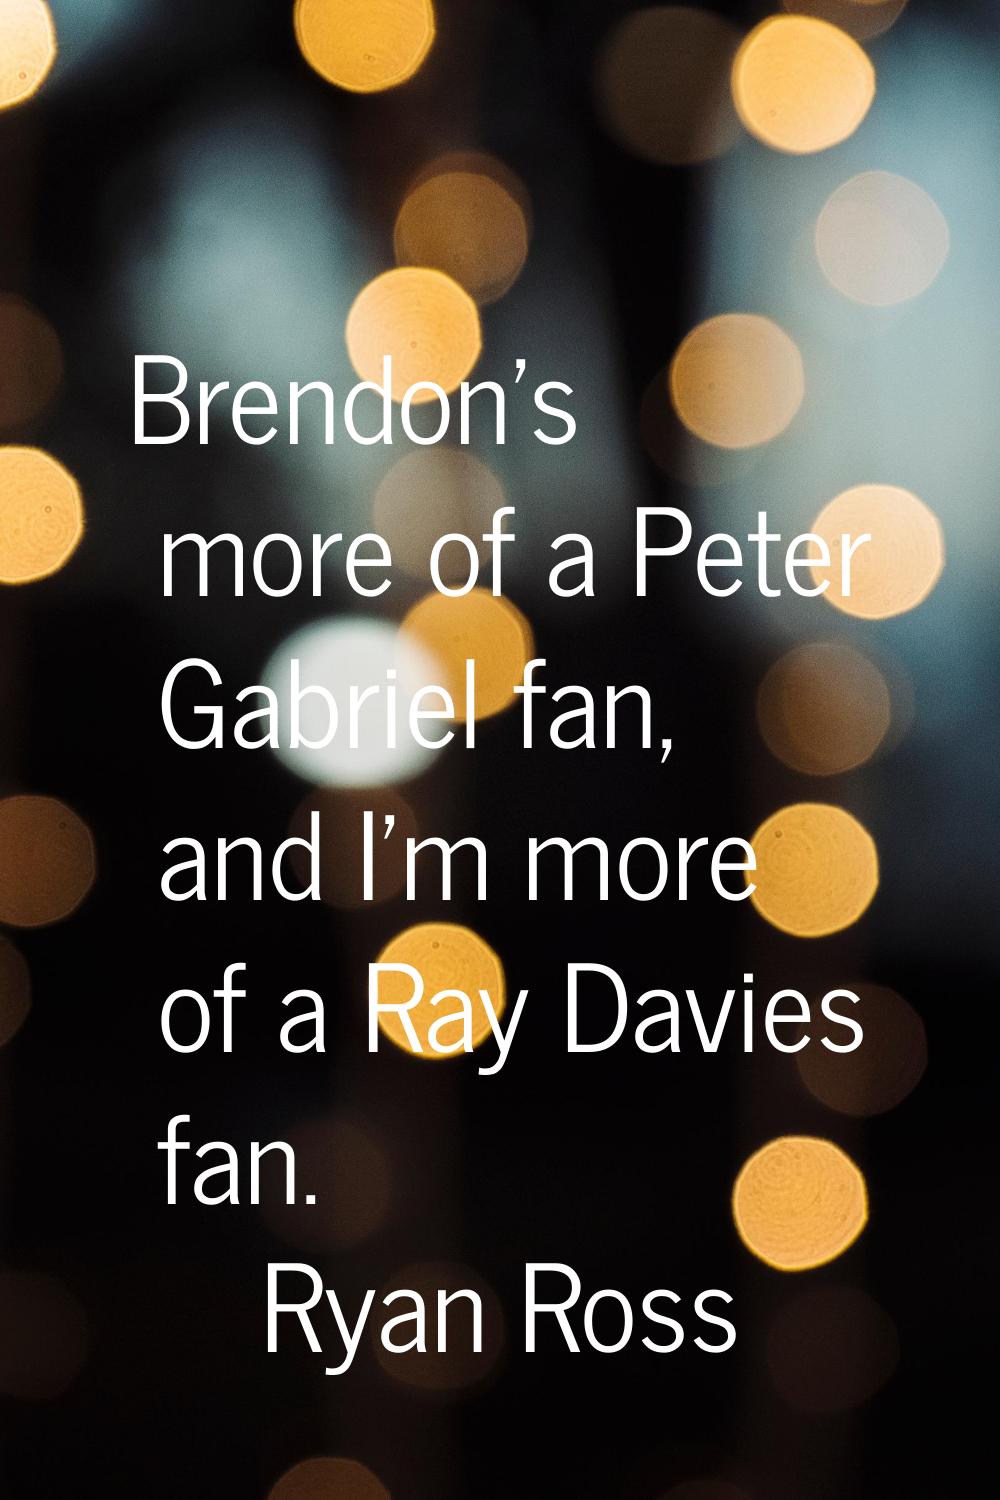 Brendon's more of a Peter Gabriel fan, and I'm more of a Ray Davies fan.